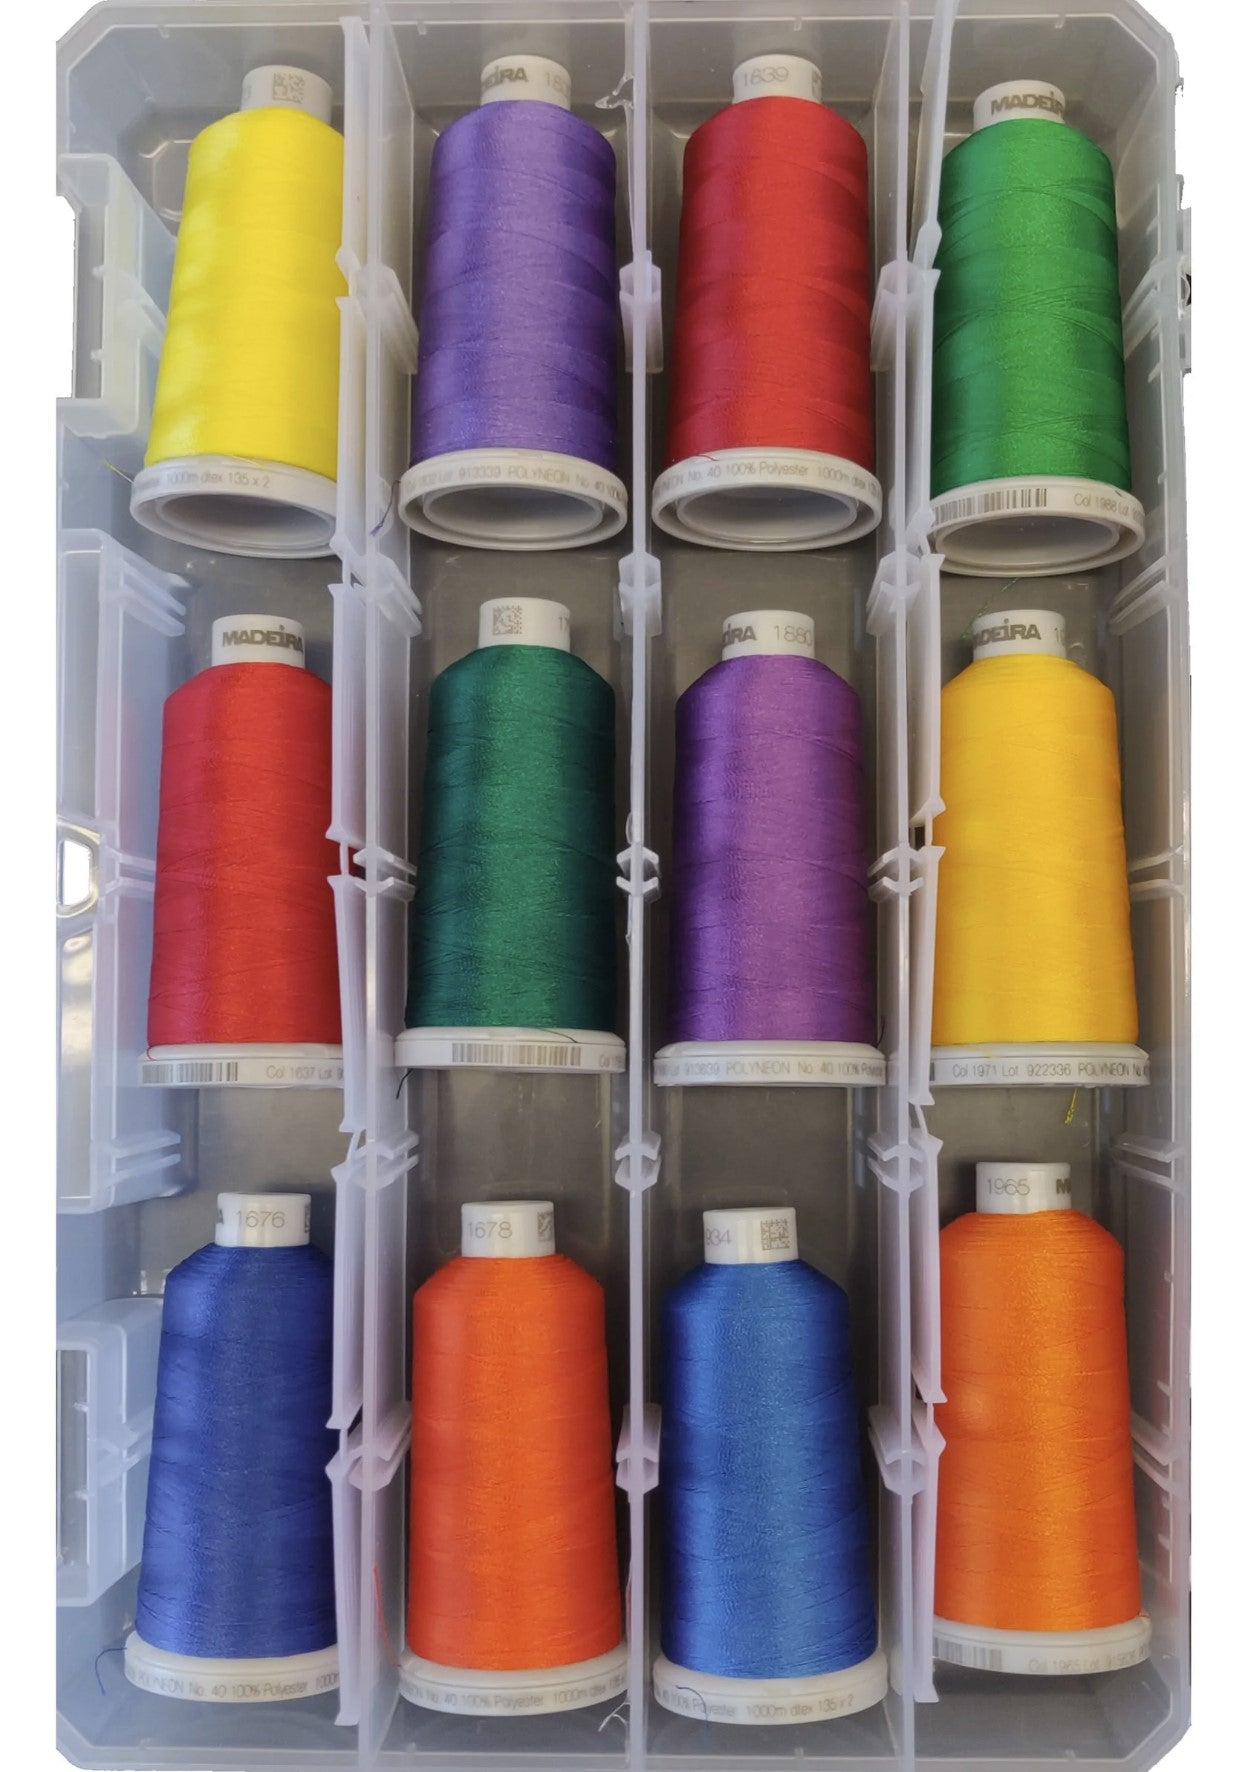 Basic Primary Colors: 1,100-yards Mini Snap Cones, Polyneon #40, Machine Embroidery Thread Collection,  12 units/pack by MADEIRA